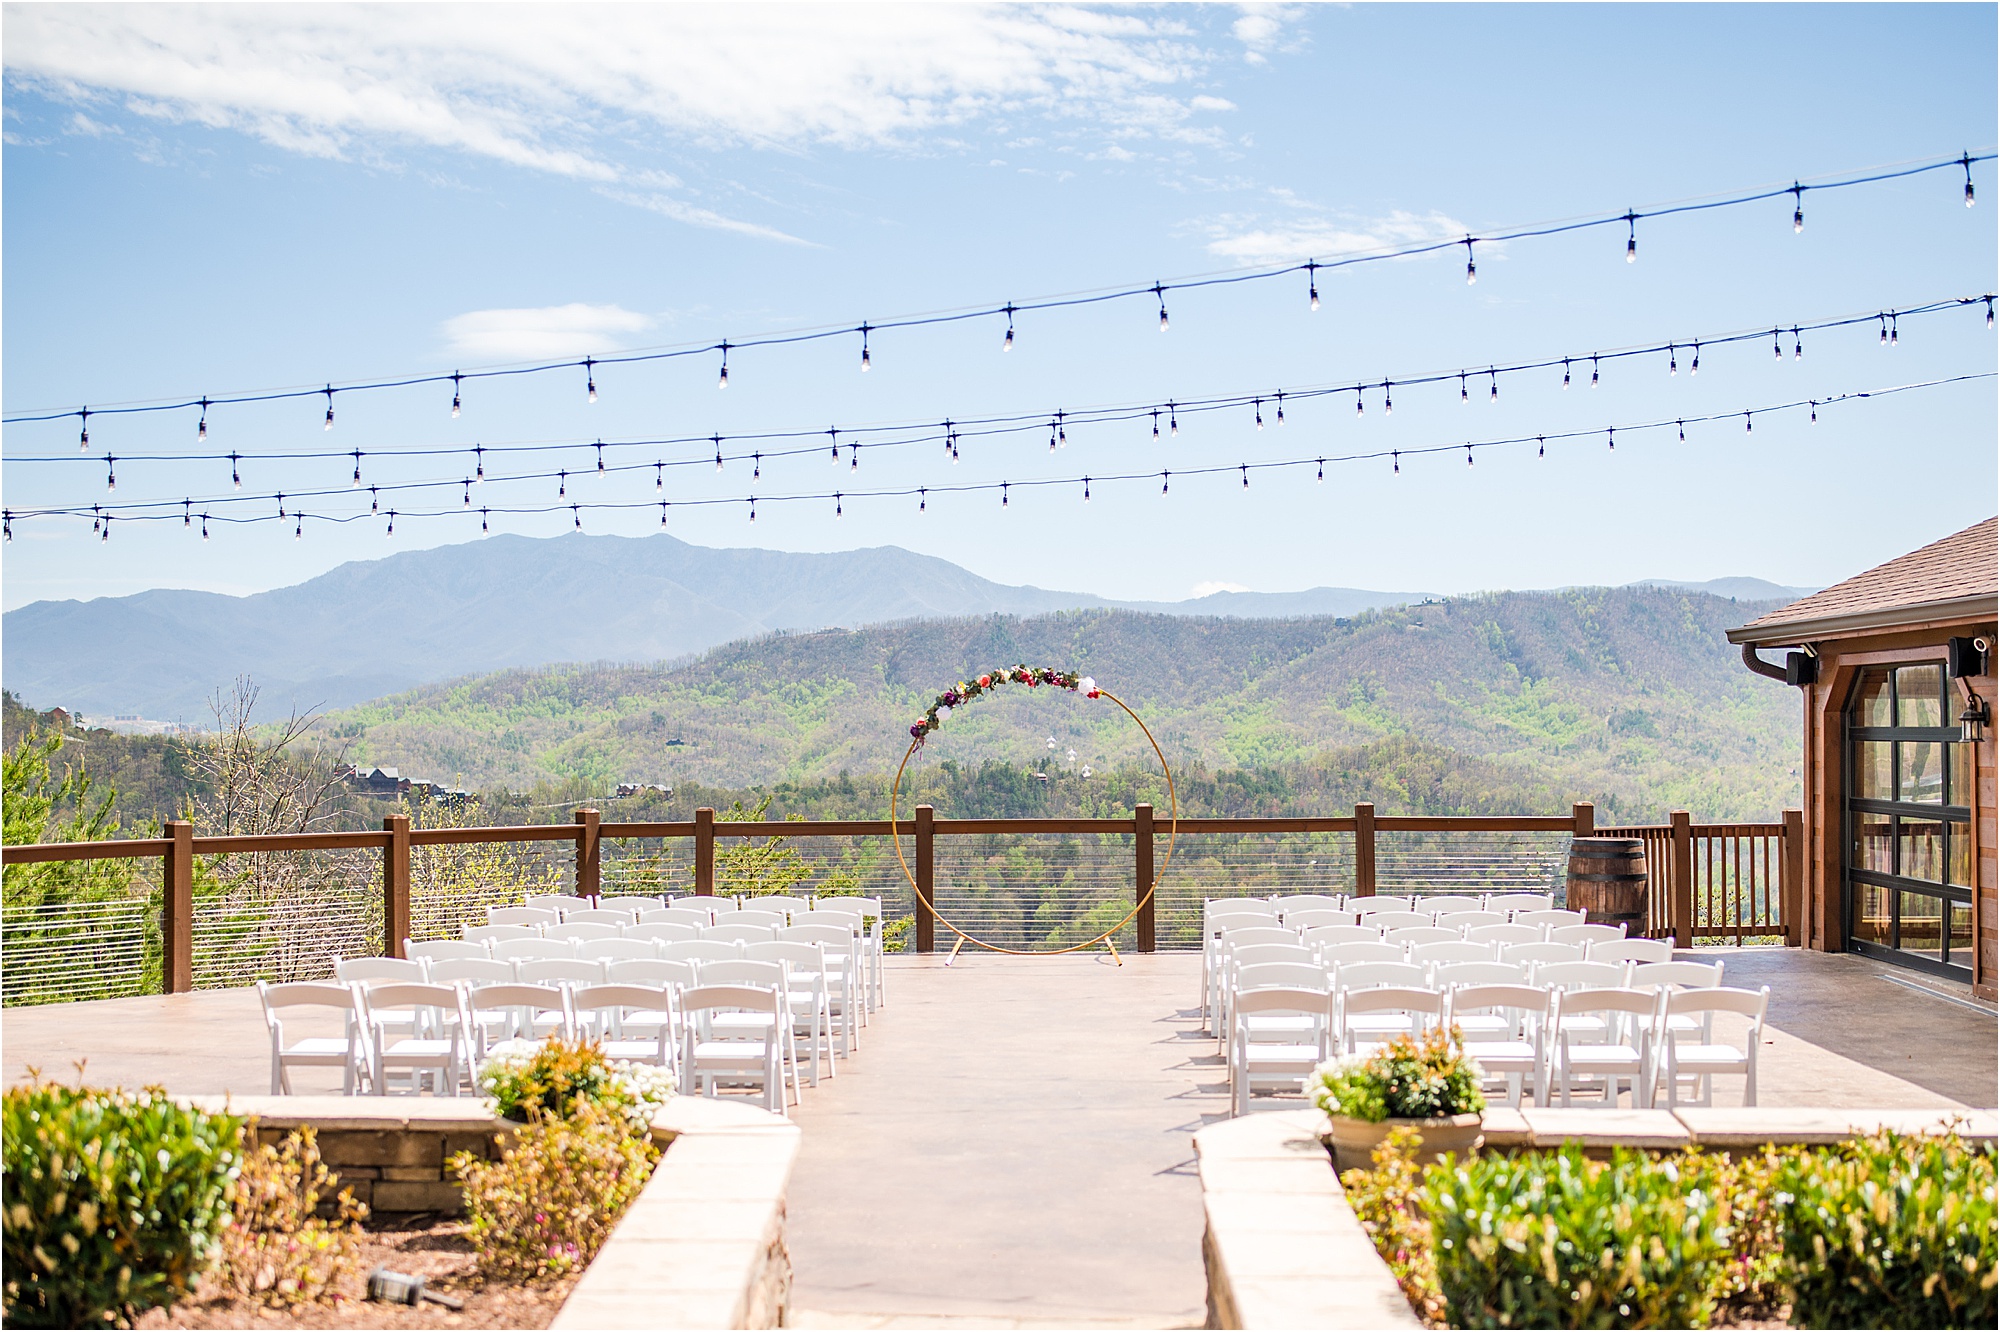 mountainside wedding ceremony with circle wedding arbor and chairs